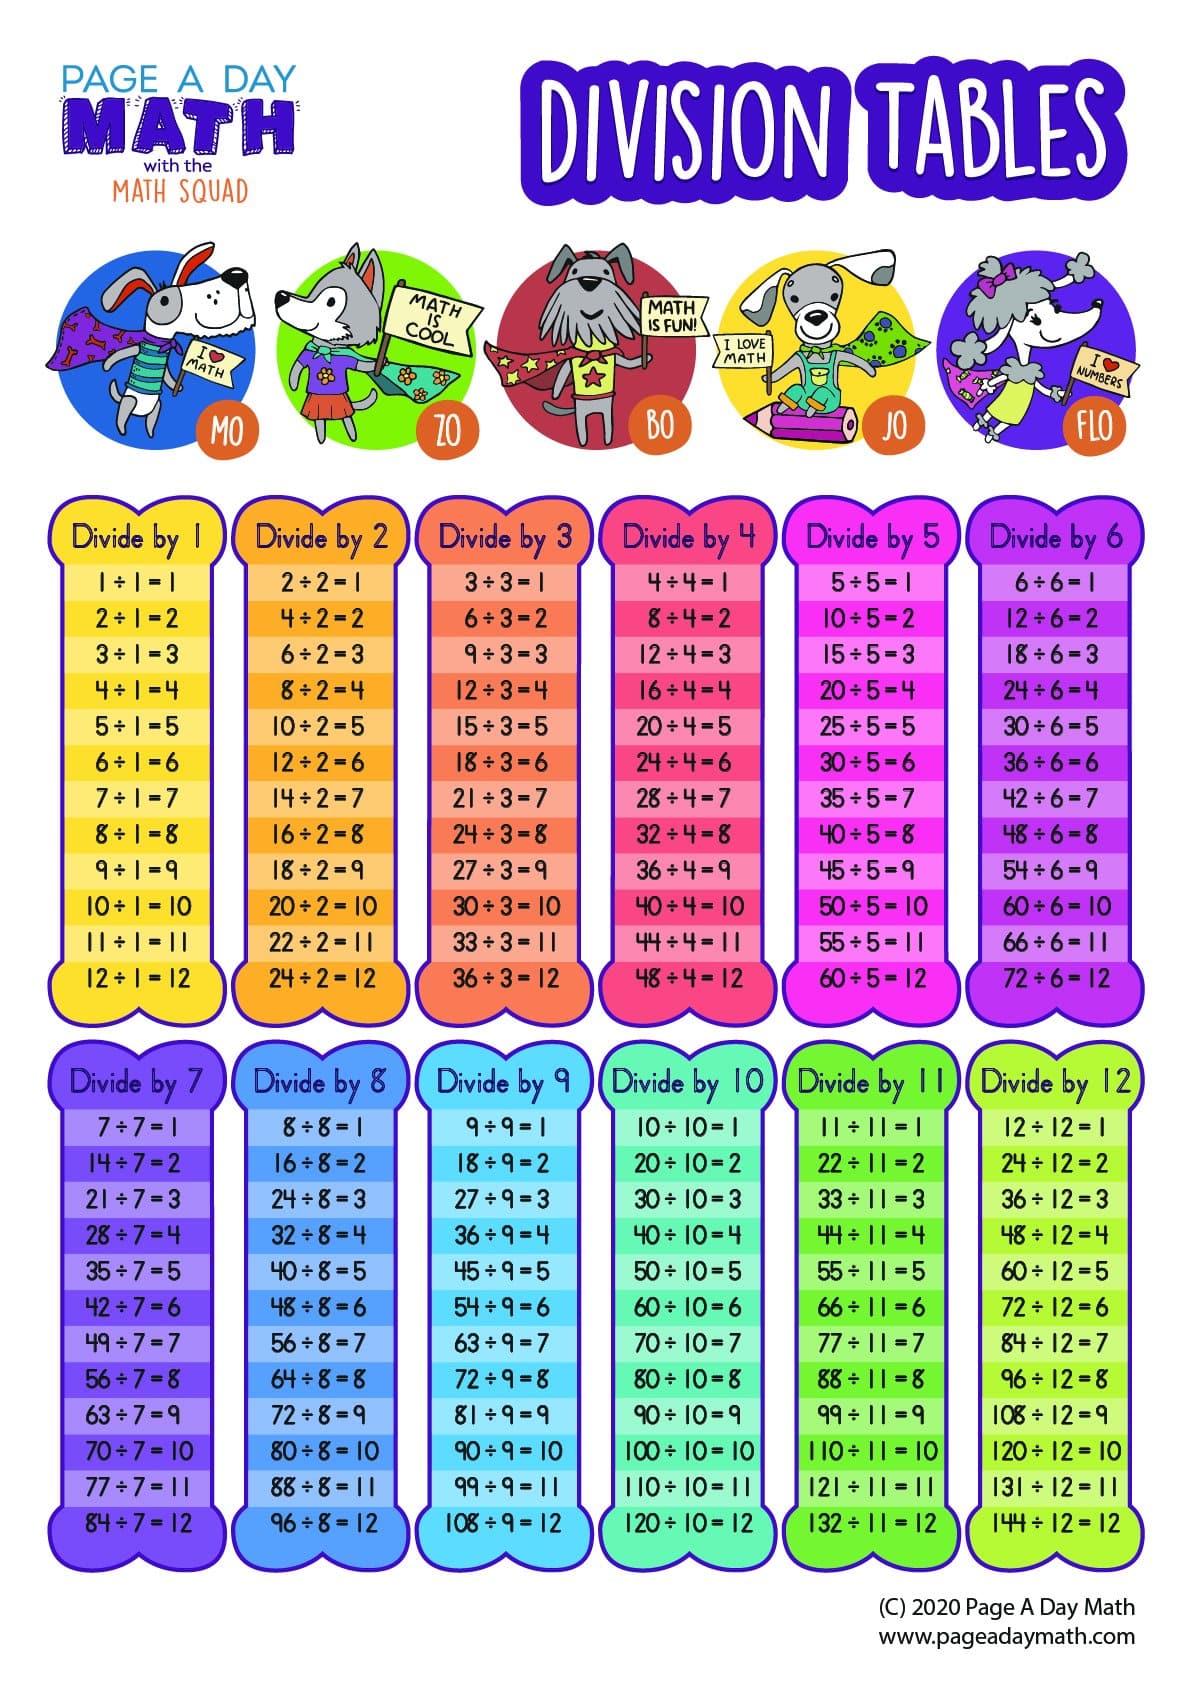 division-table-division-chart-division-activity-stickers-page-a-day-math